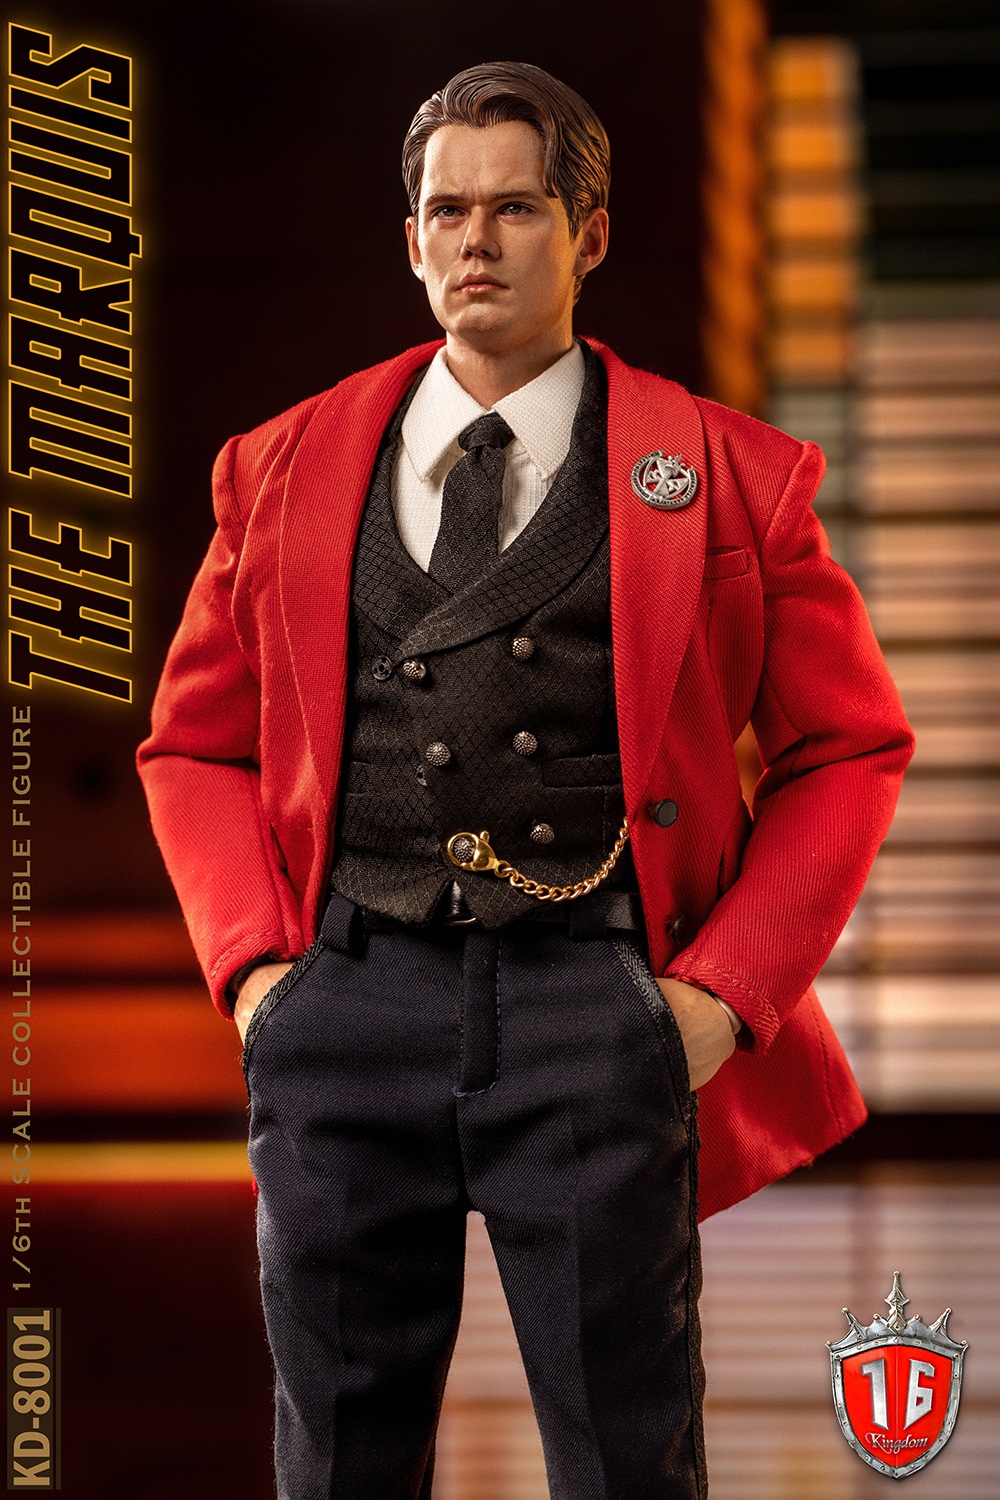 Kingdom - NEW PRODUCT: Kingdom: 1/6 The Marquis Action Figure KD-8001 11390912